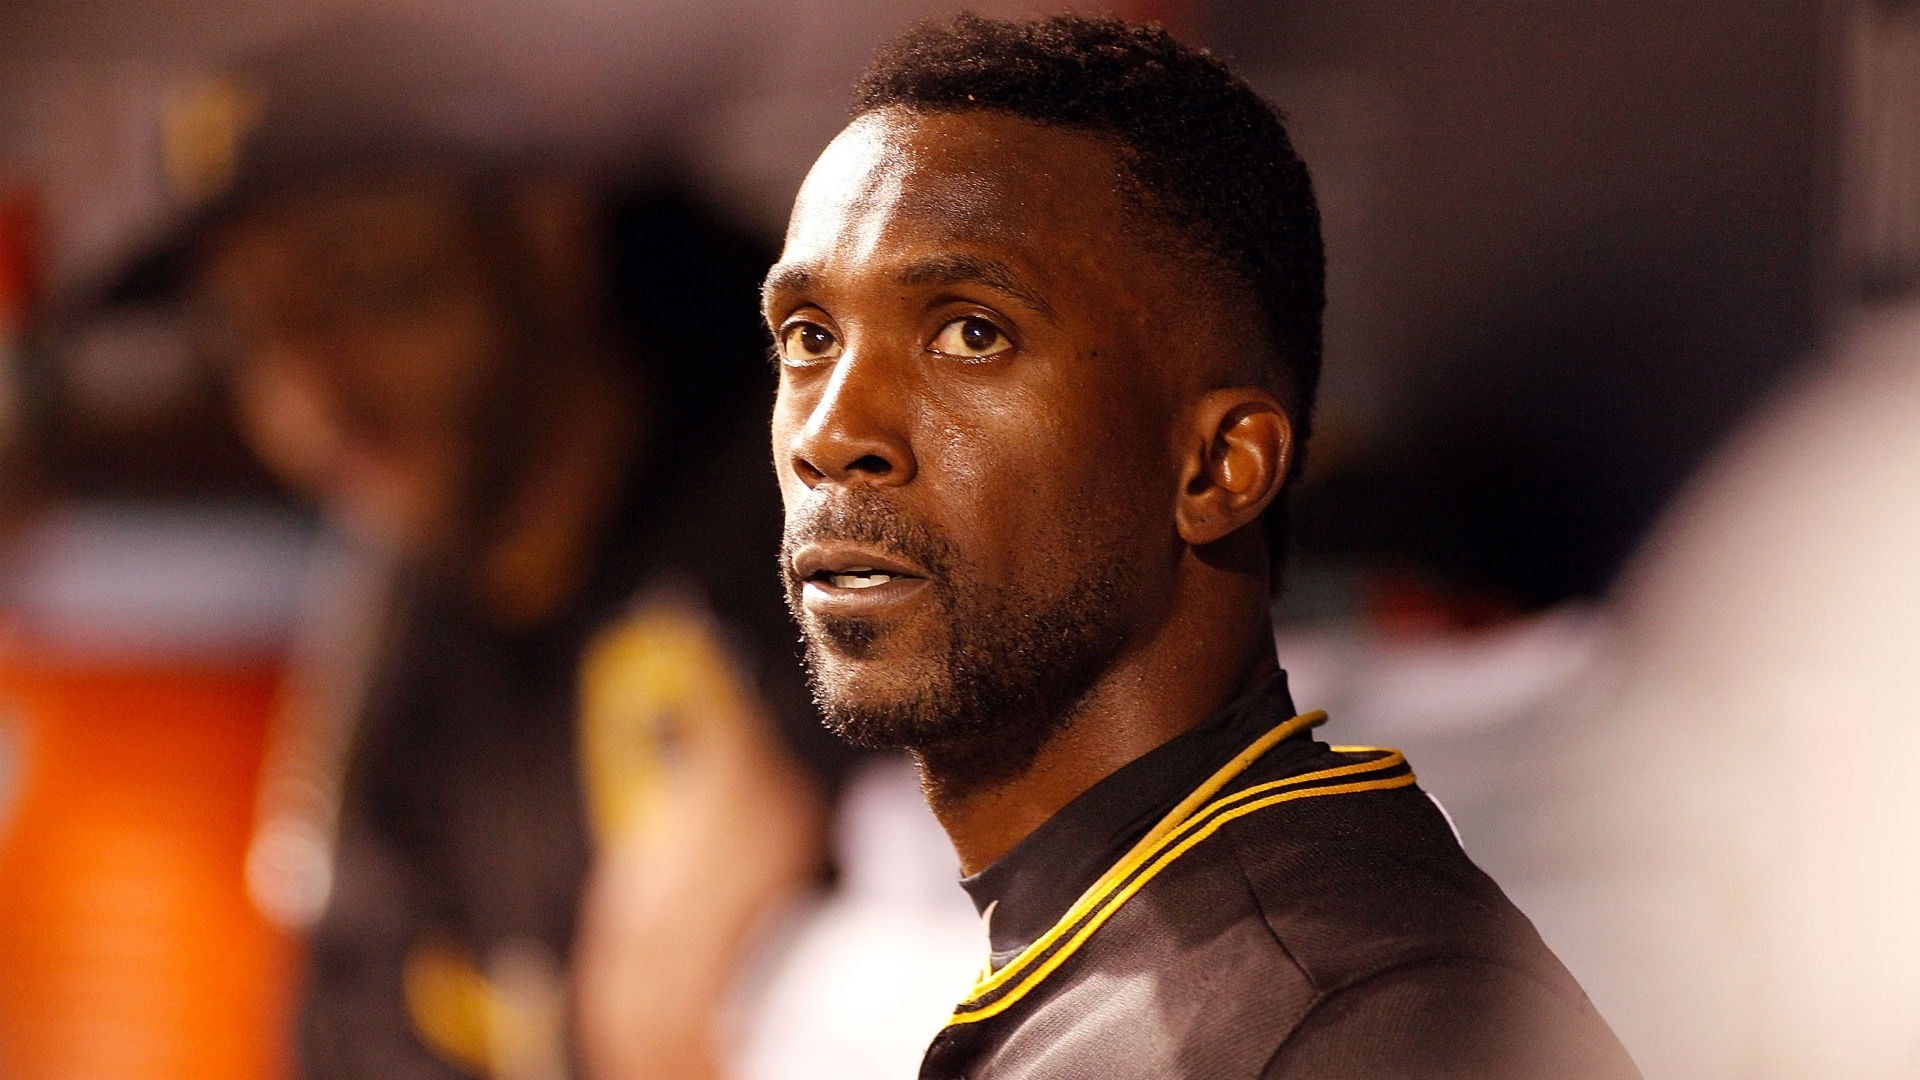 1920x1080 hd free andrew mccutchen cool 1080p windows wallpapers download free images  desktop backgrounds high quality colourful 1920Ã1080 Wallpaper HD